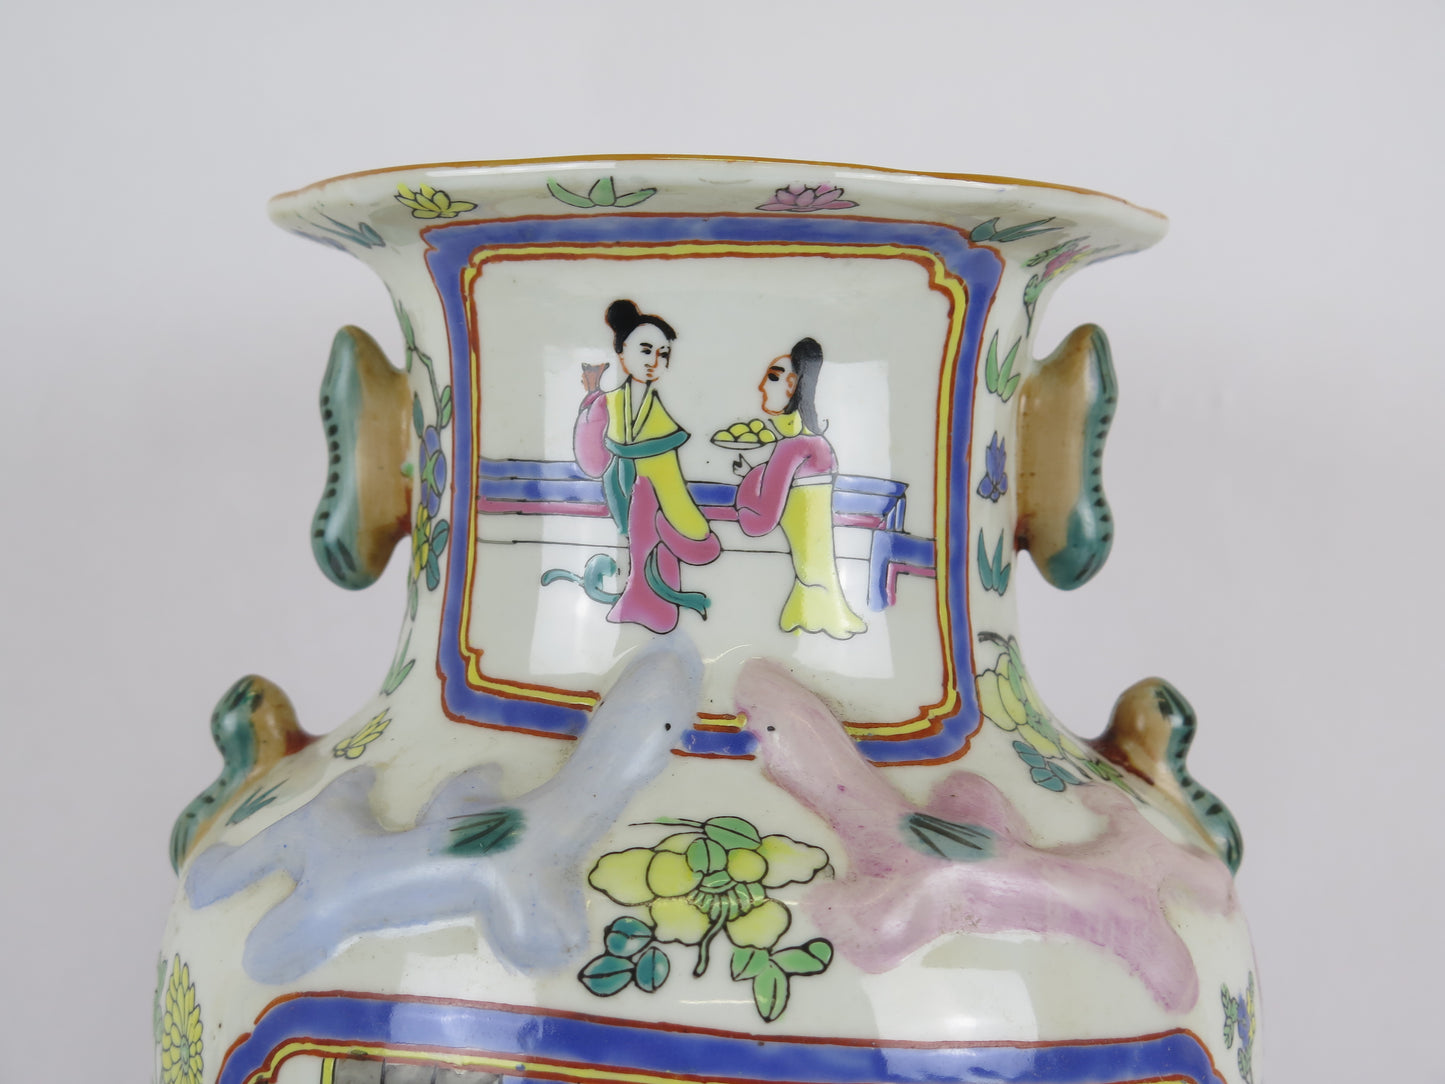 Vintage hand-painted glazed ceramic vase with floral and vegetal motifs China Asia '900 CM5